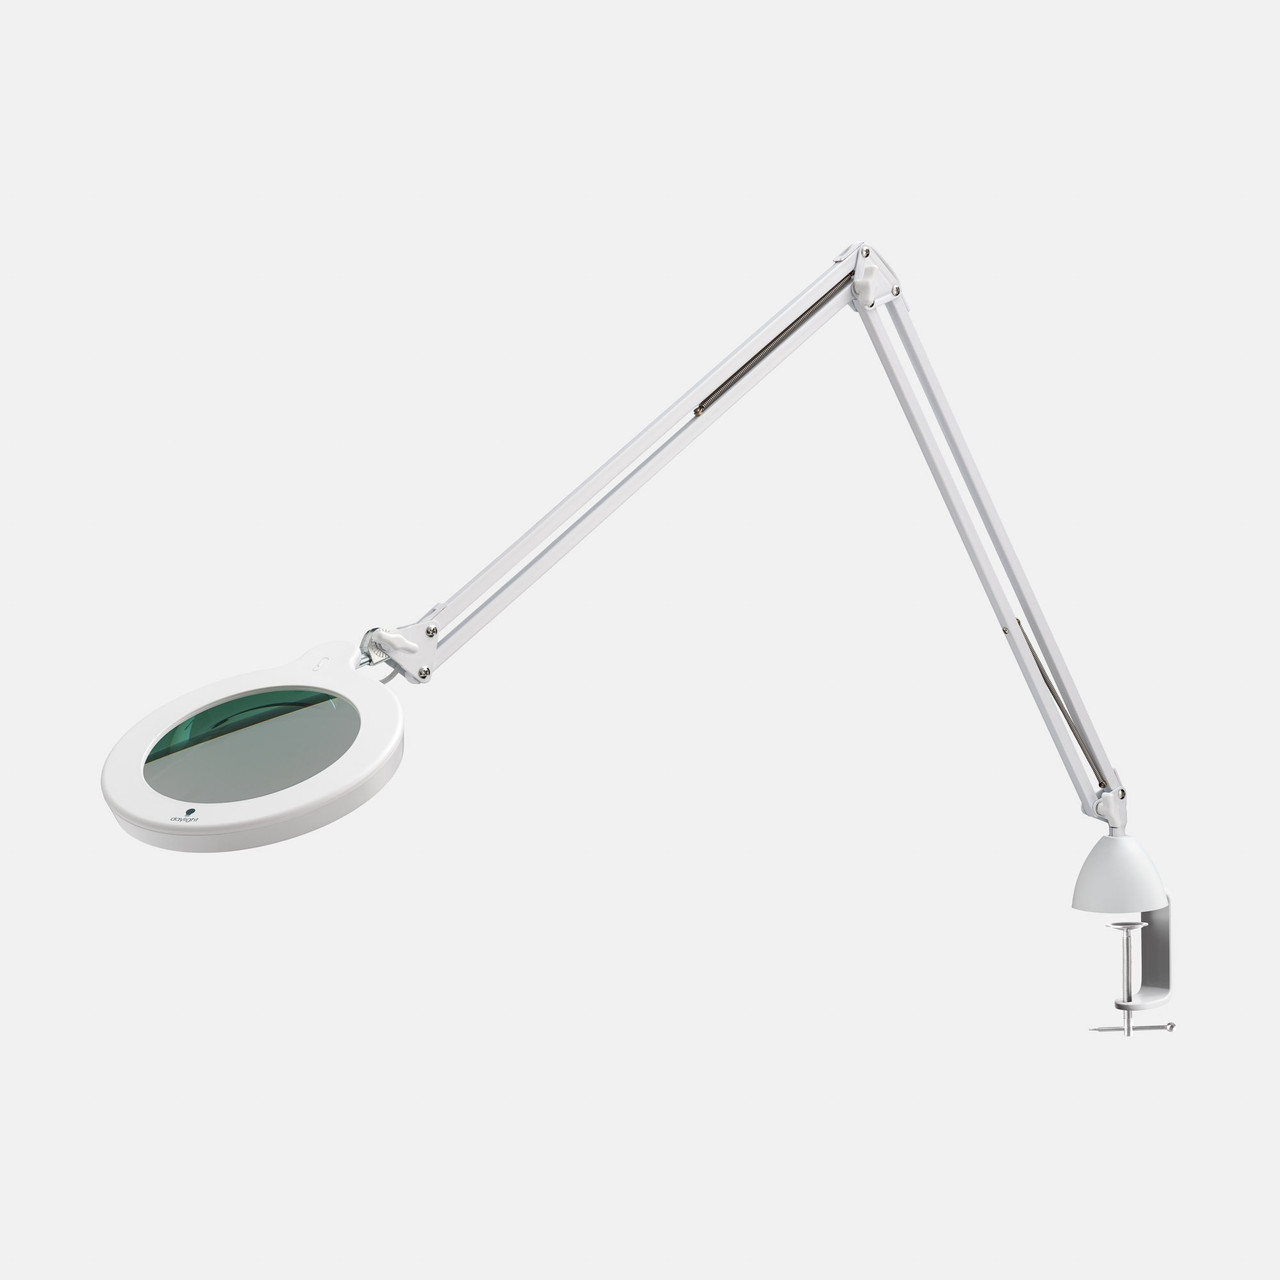 Portable Floor Lamp Magnifier LED Magnifying Light 5 Diopter